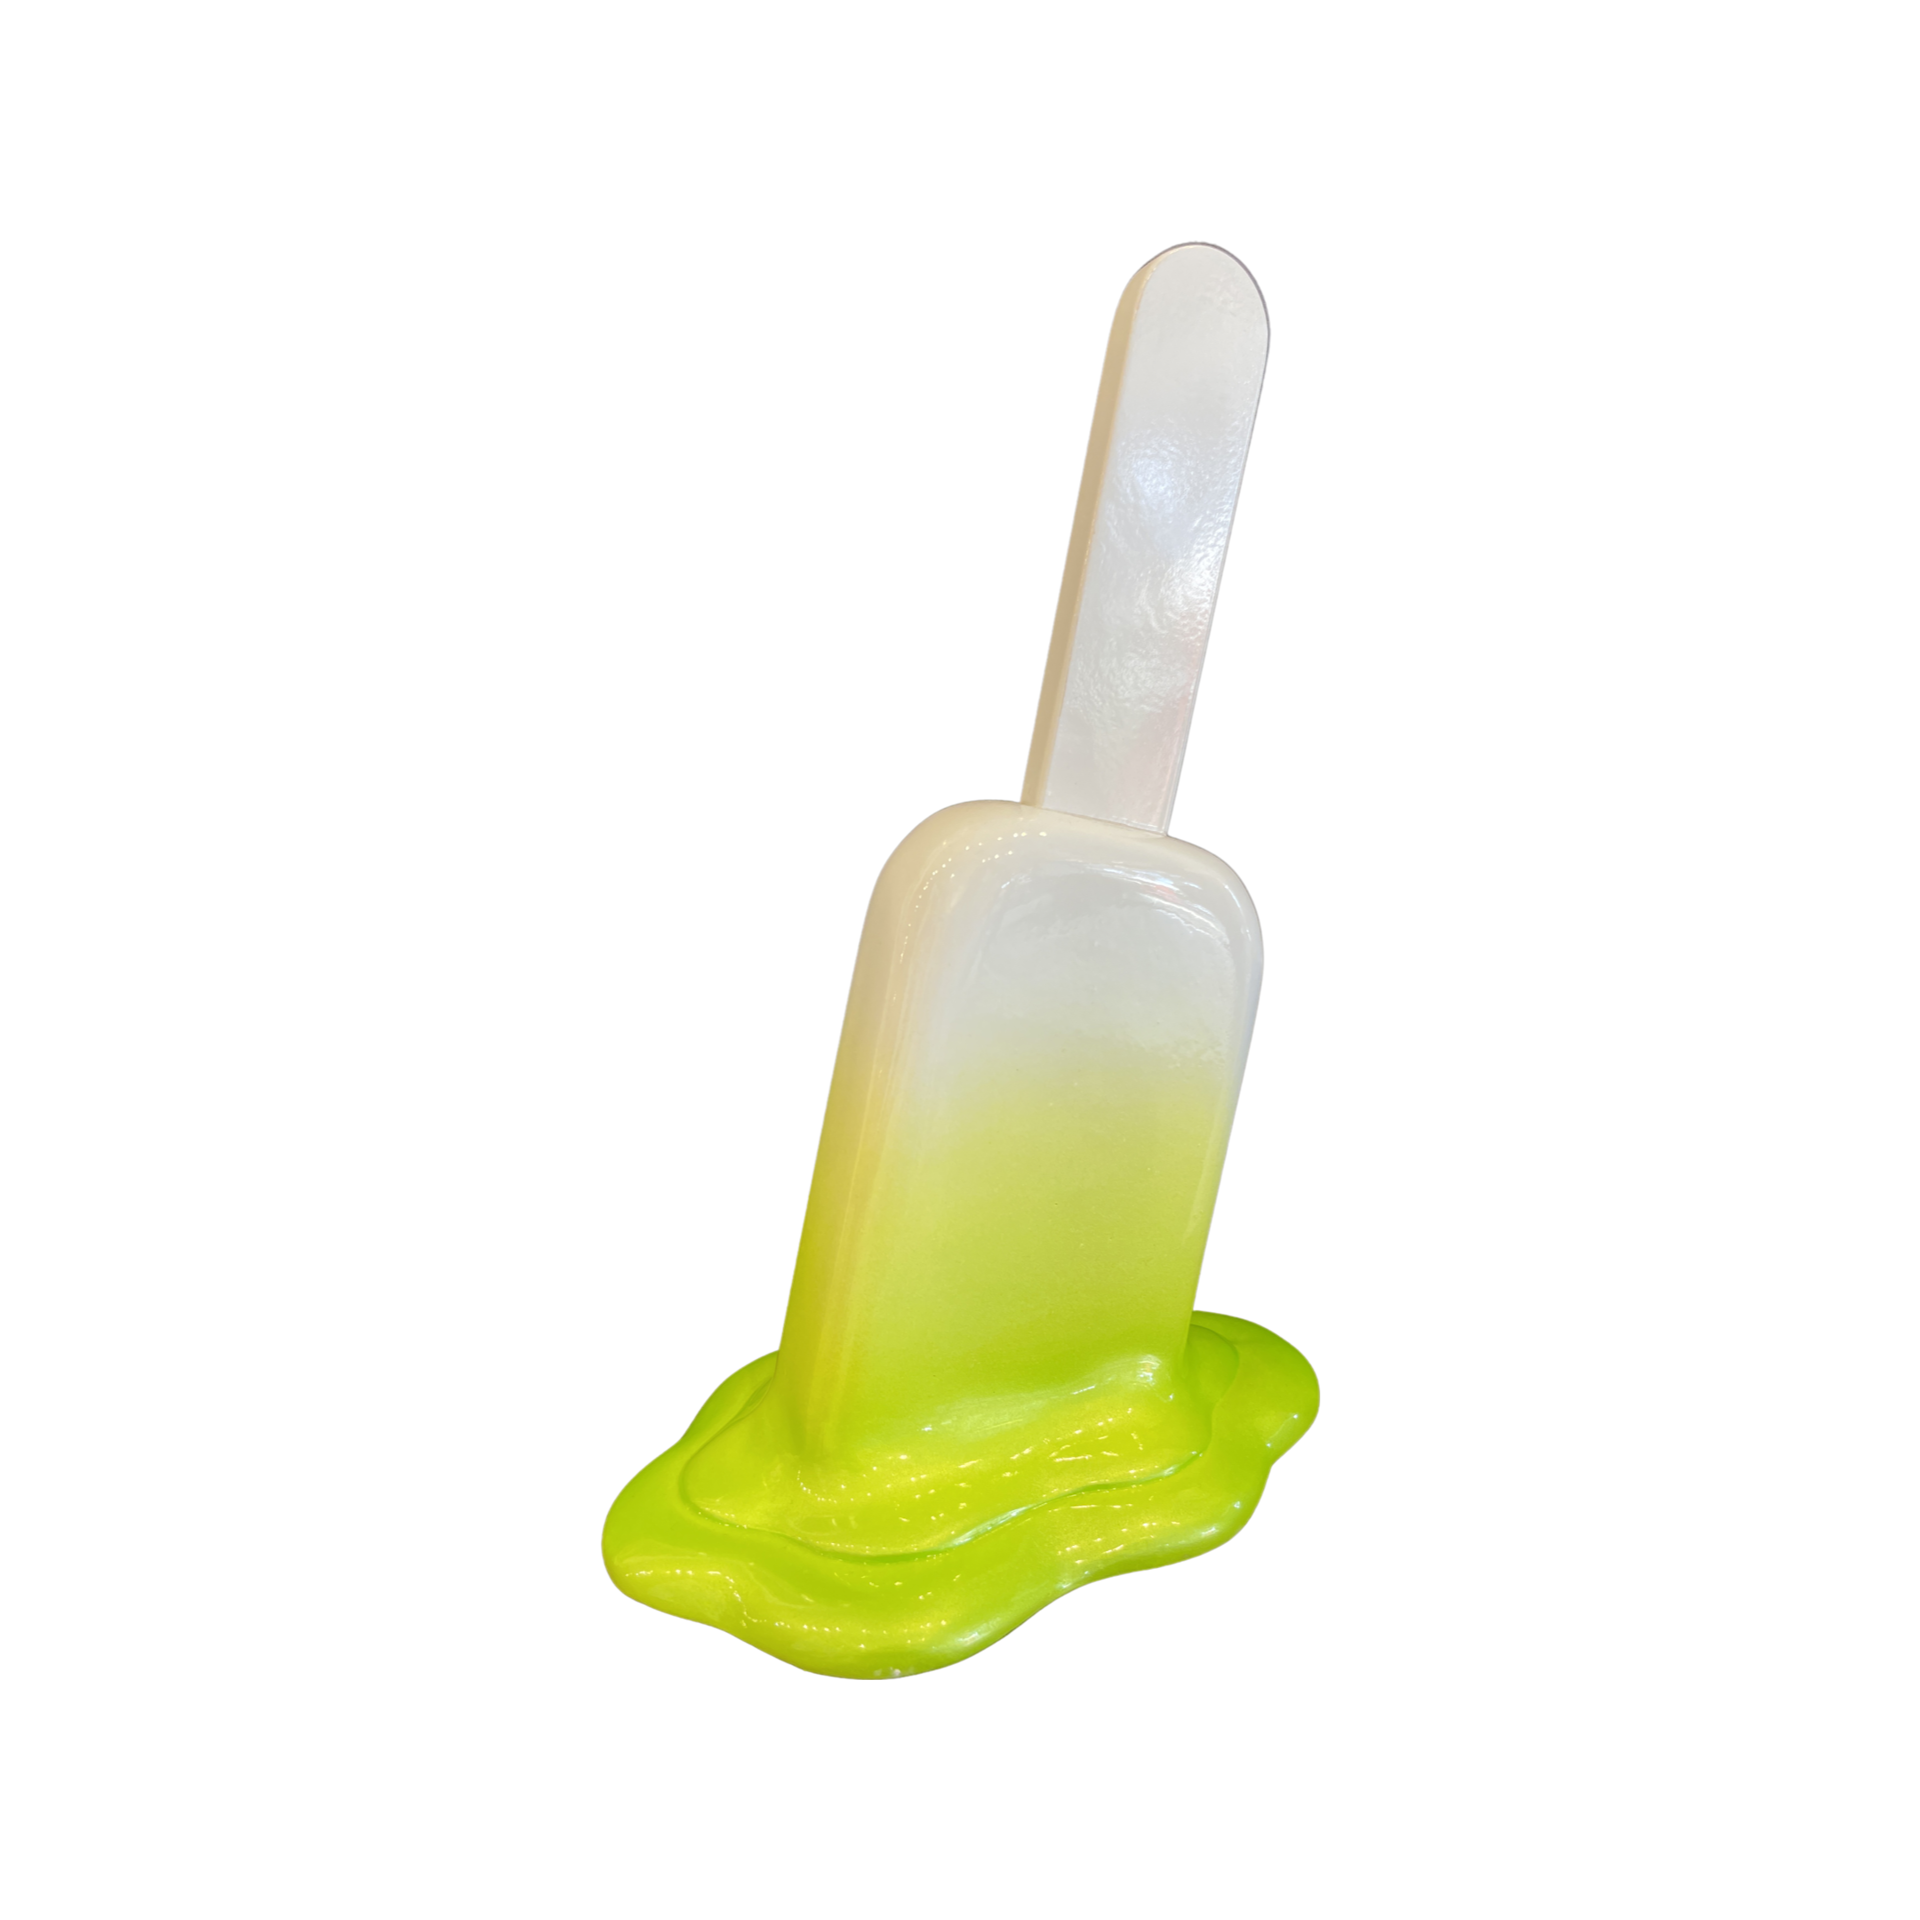 White/Lime Small Popsicle by Popsicles  by Elena Bulatova